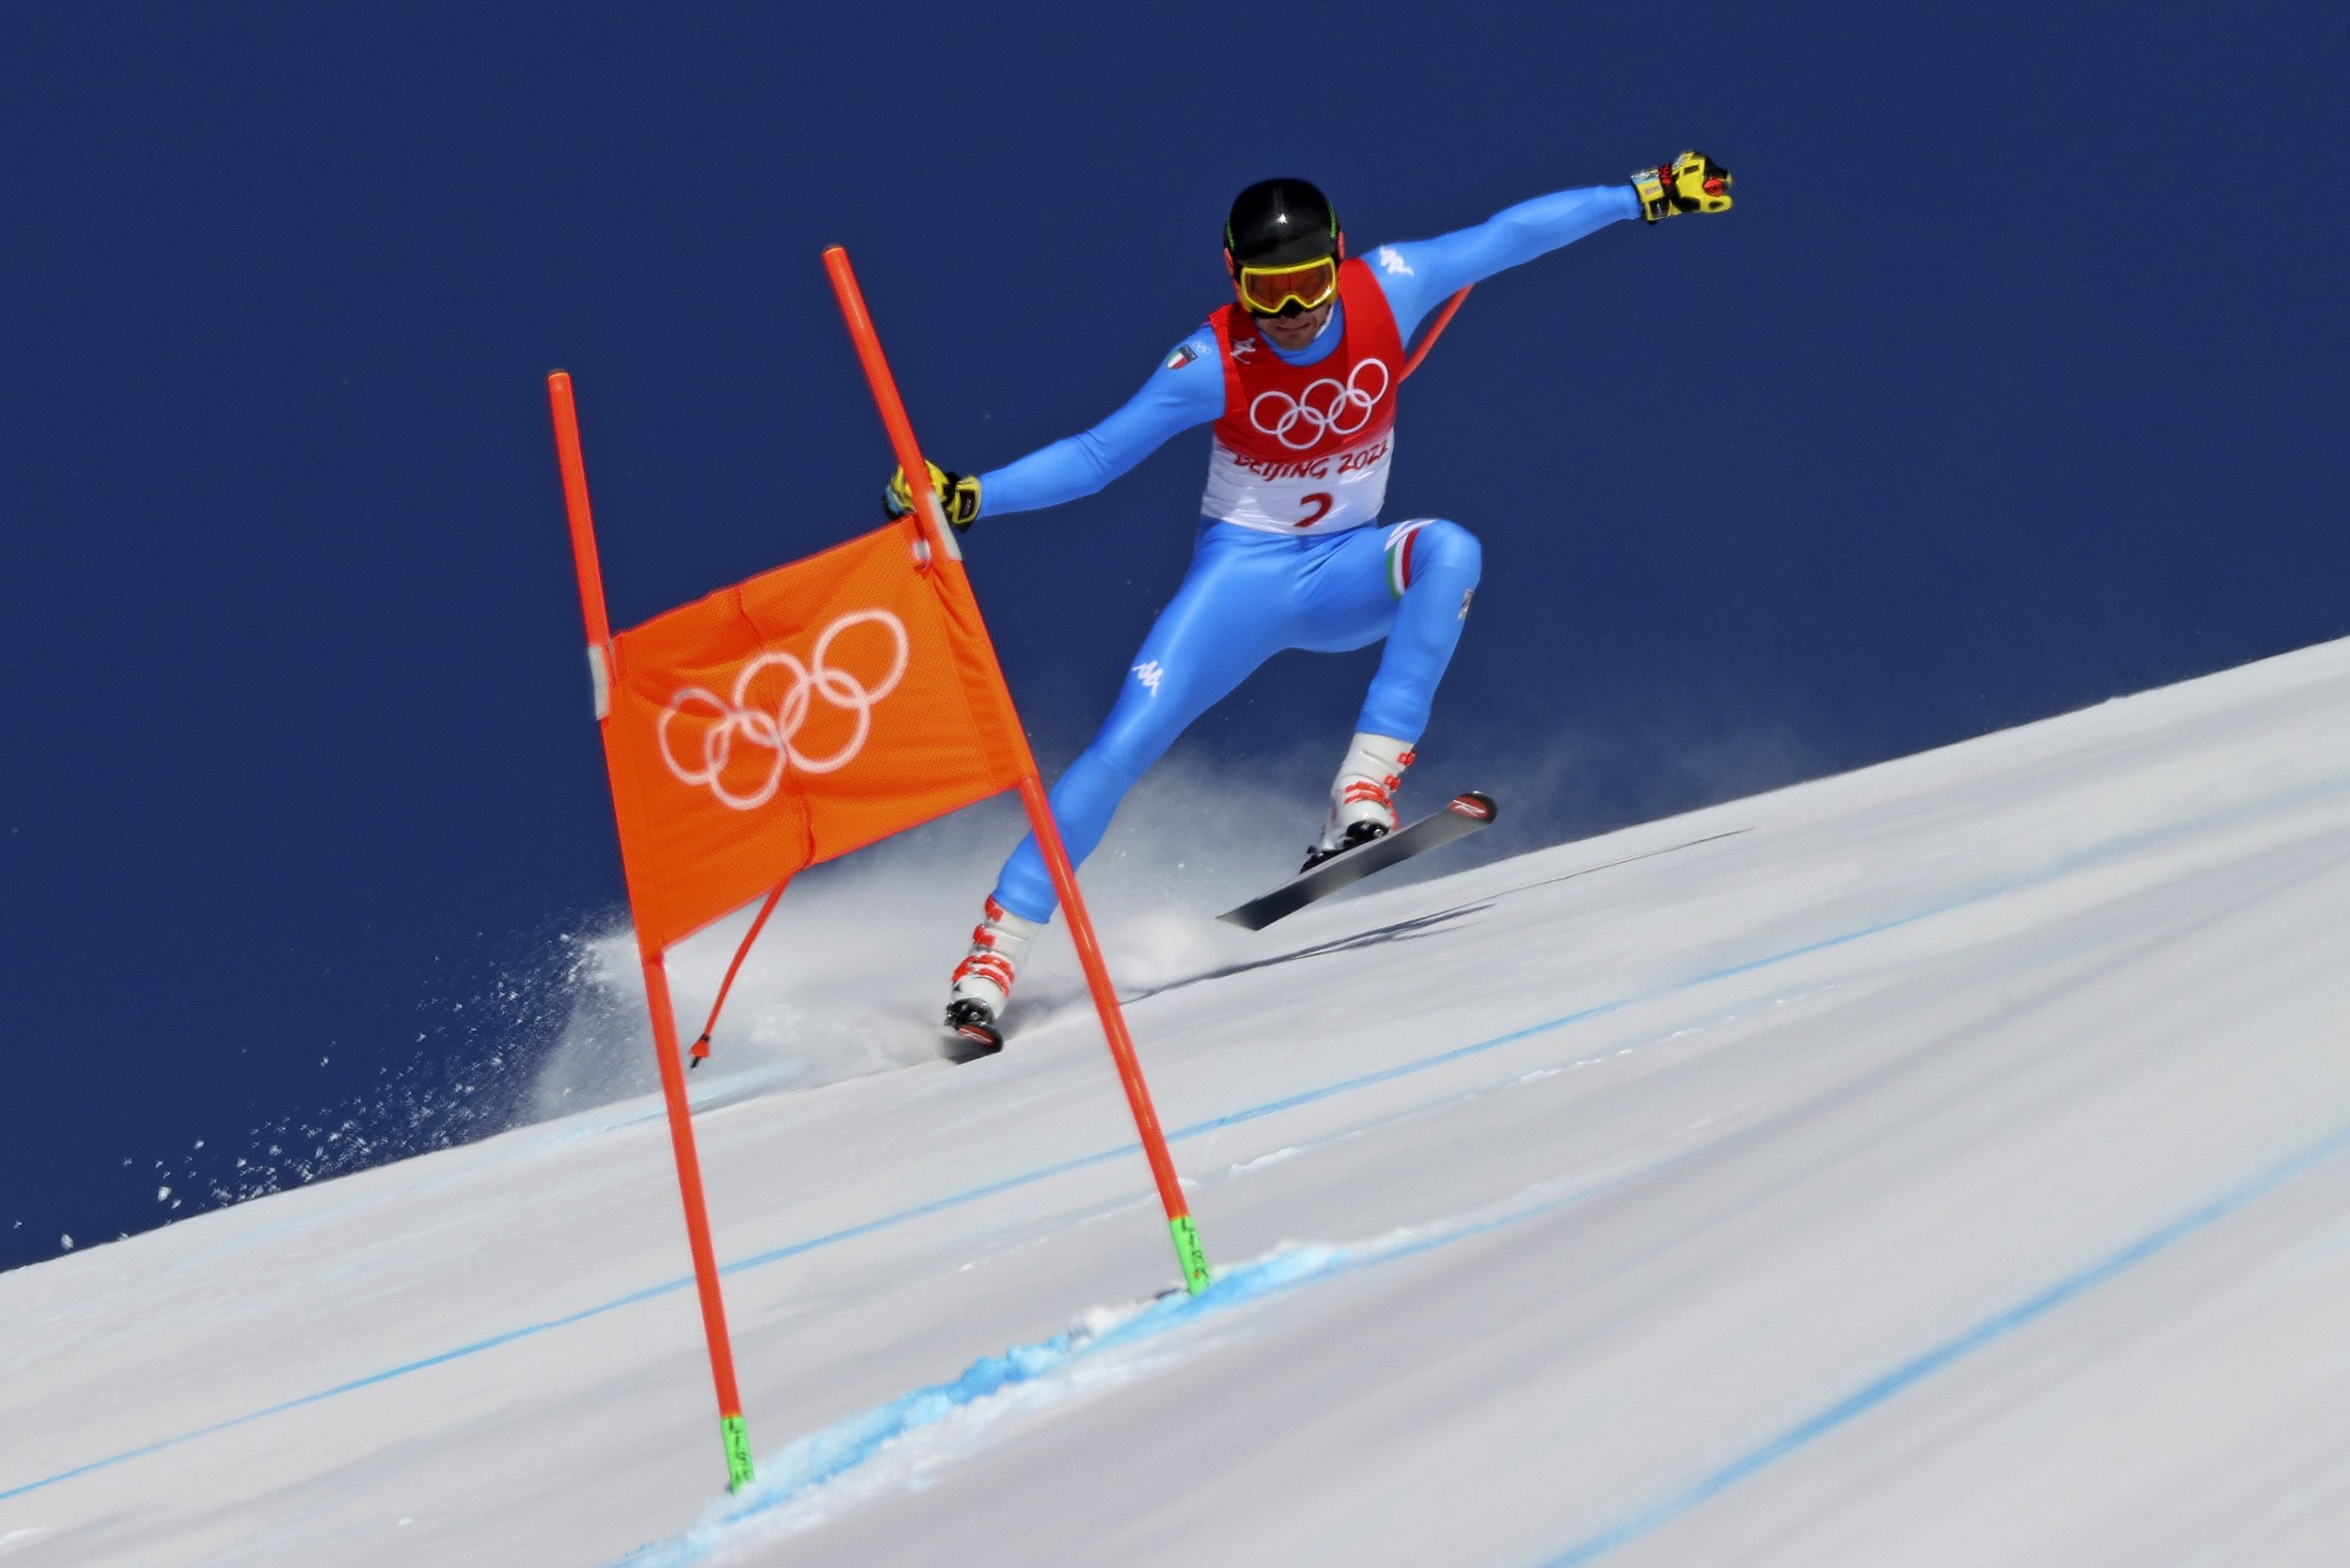  Christof Innerhofer, of Italy makes a turn during men's downhill training at the 2022 Winter Olympics, Saturday, Feb. 5, 2022, in the Yanqing district of Beijing. (AP Photo/Alessandro Trovati) 